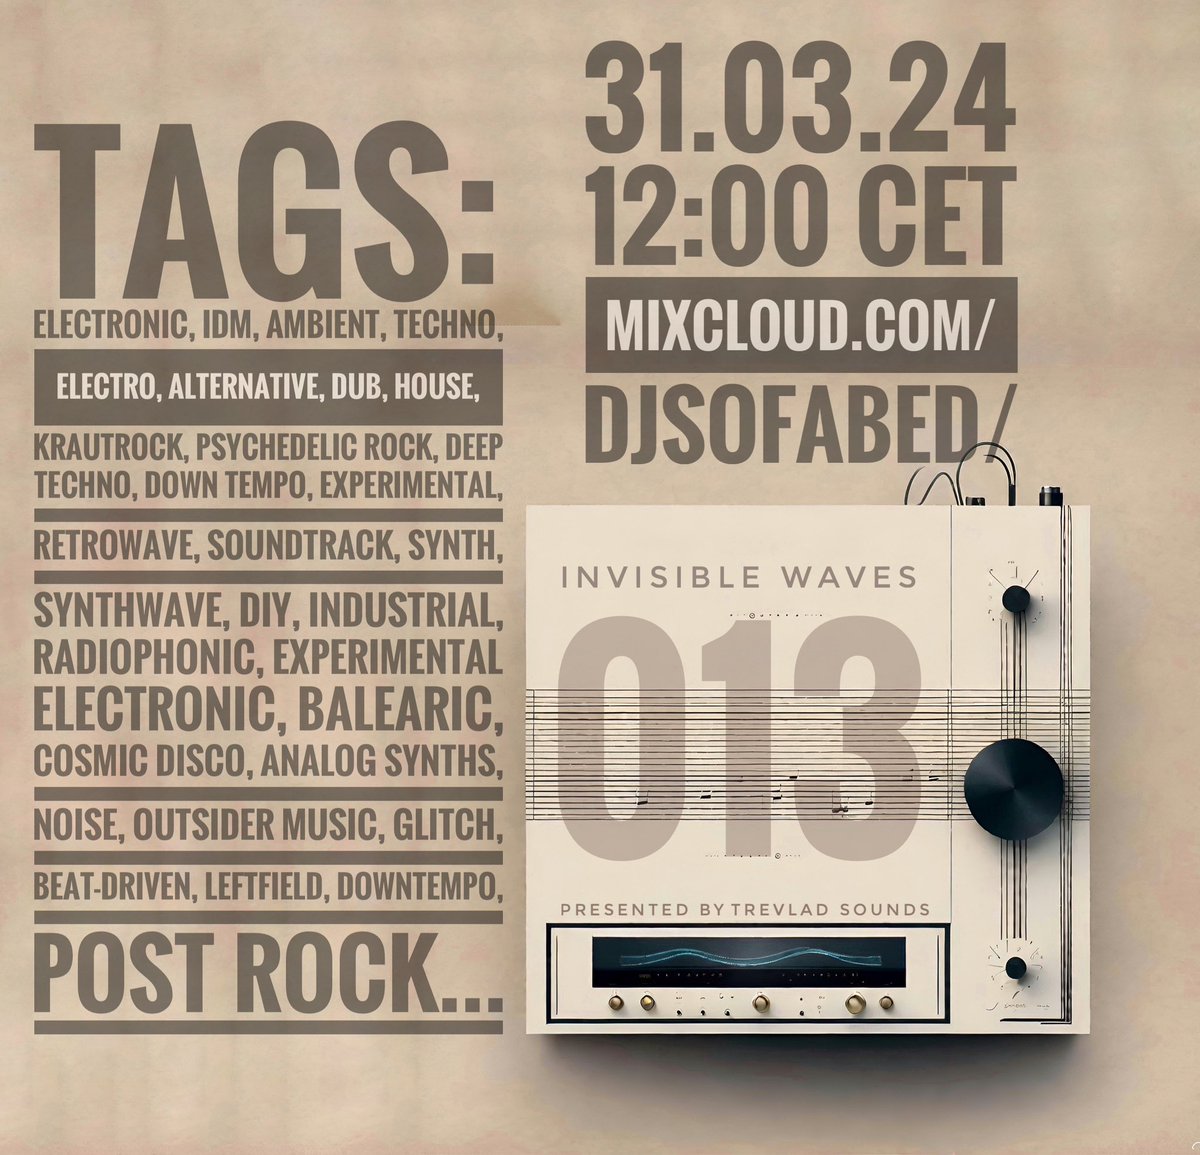 All the info for episode 013 of invisible Waves.